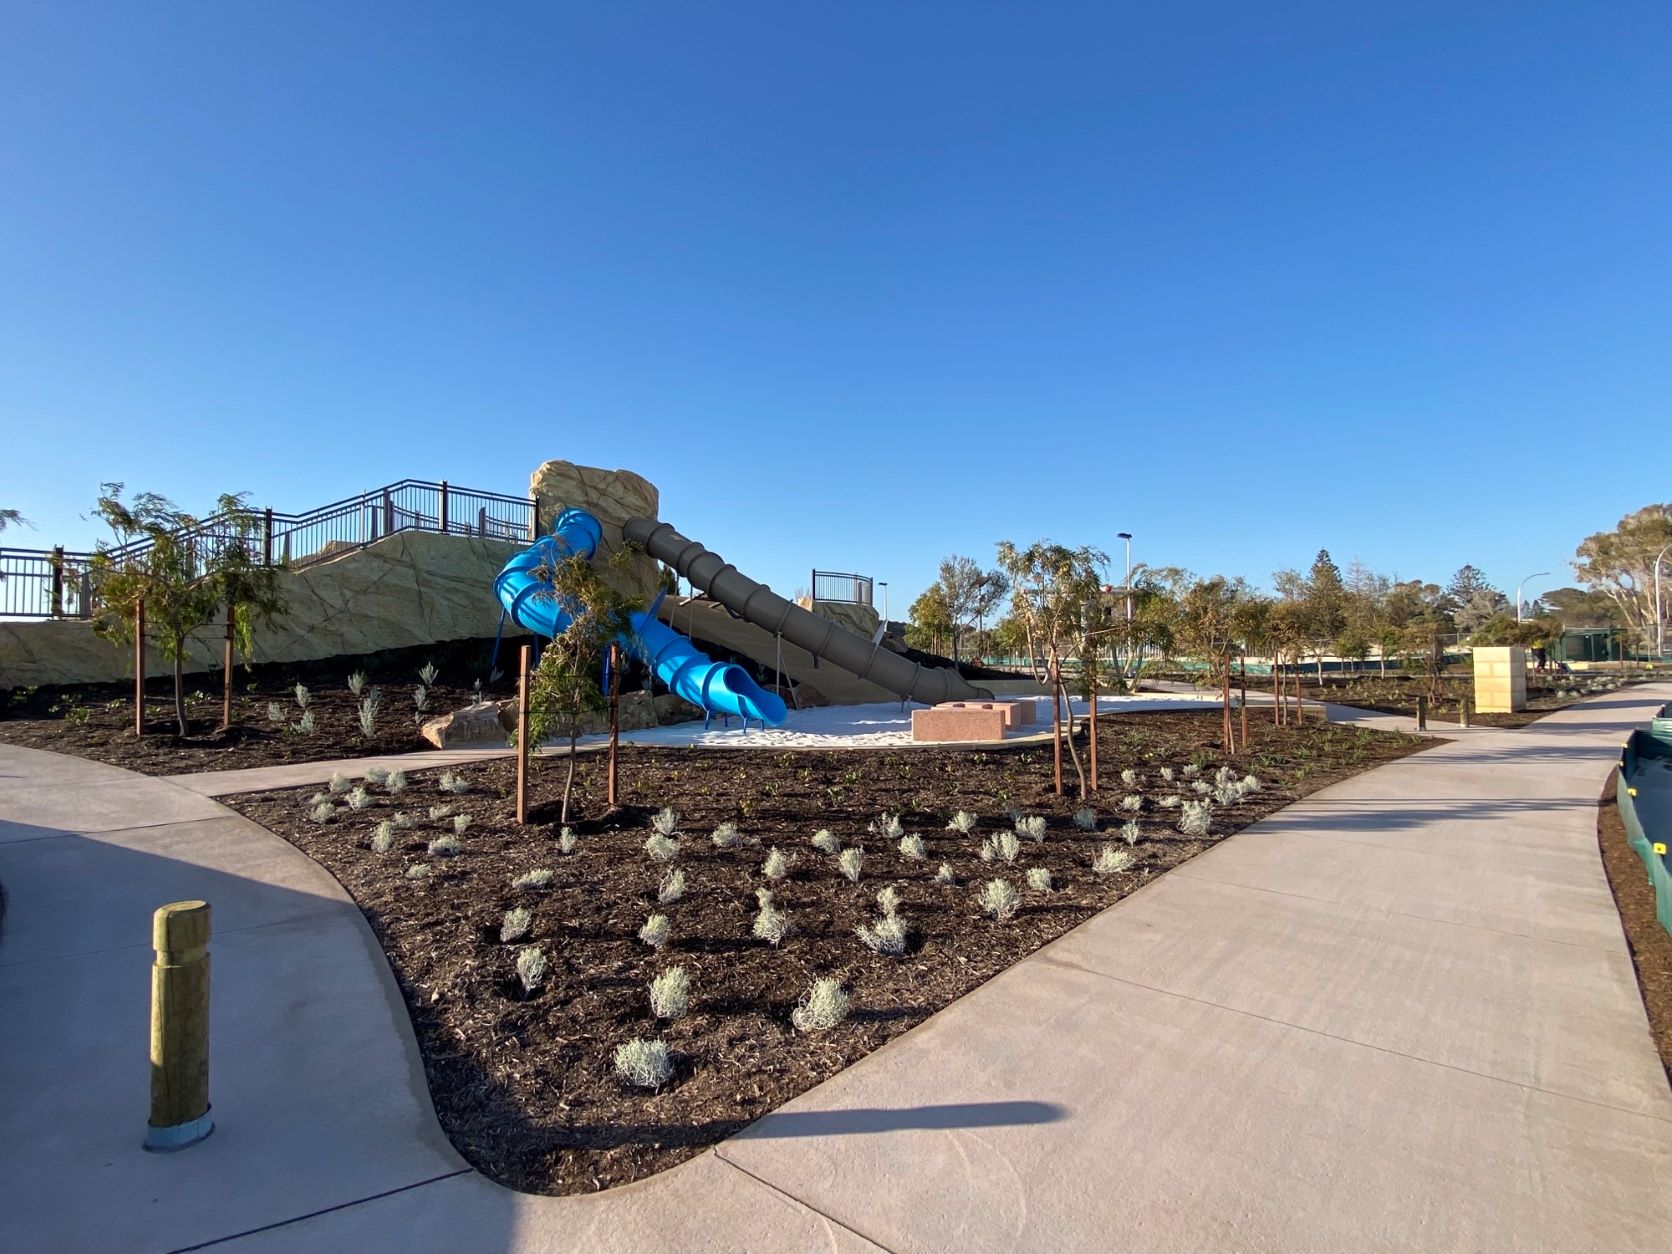 A playground at Capricorn Beach with a slide and a water feature, providing fun and entertainment for children.